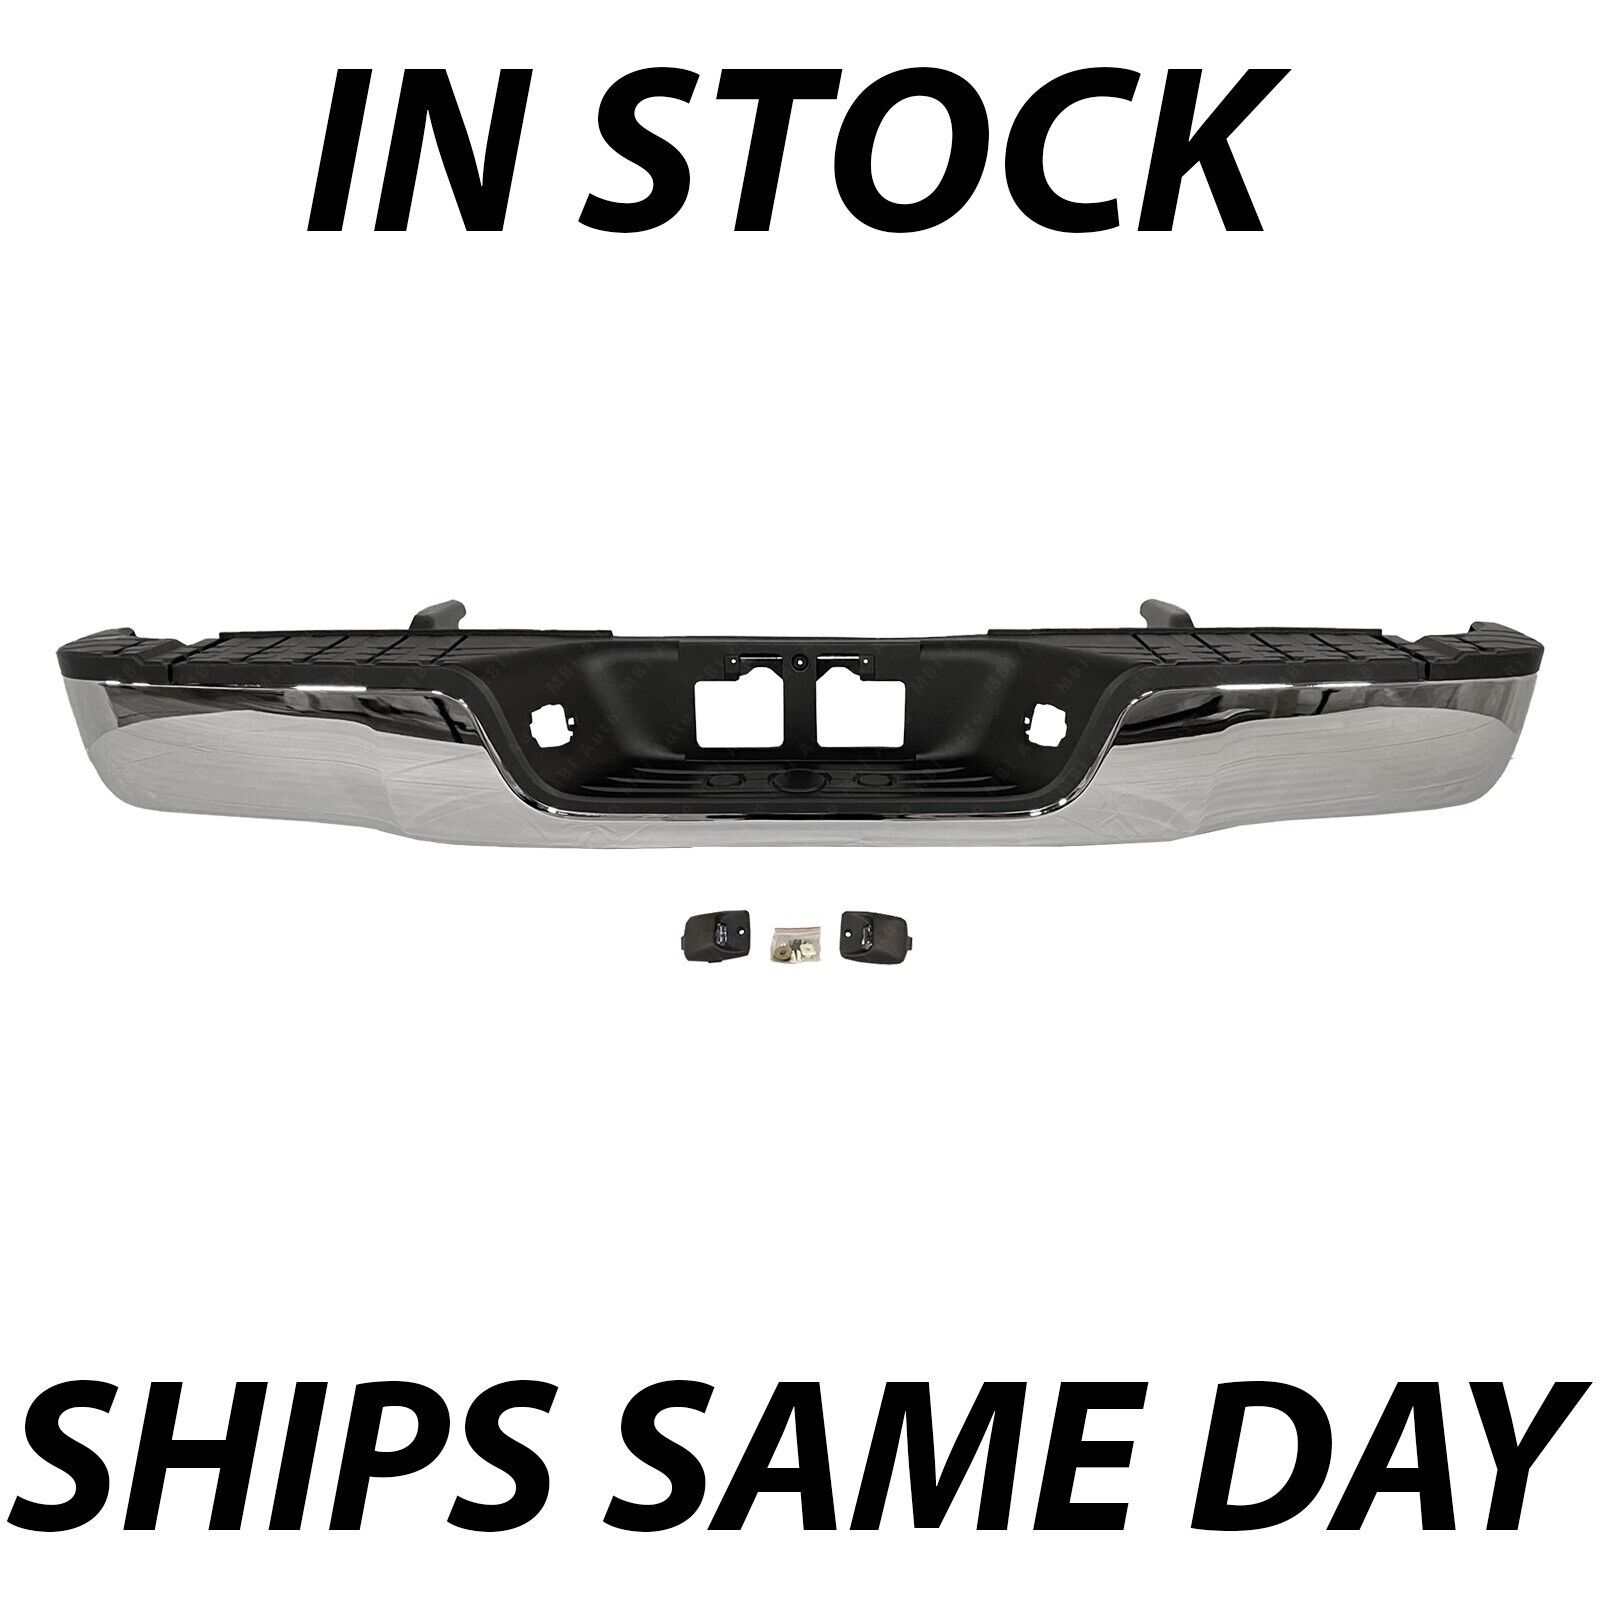 NEW Chrome - Complete Steel Rear Bumper W/ Hardware For 2007-2013 Toyota Tundra